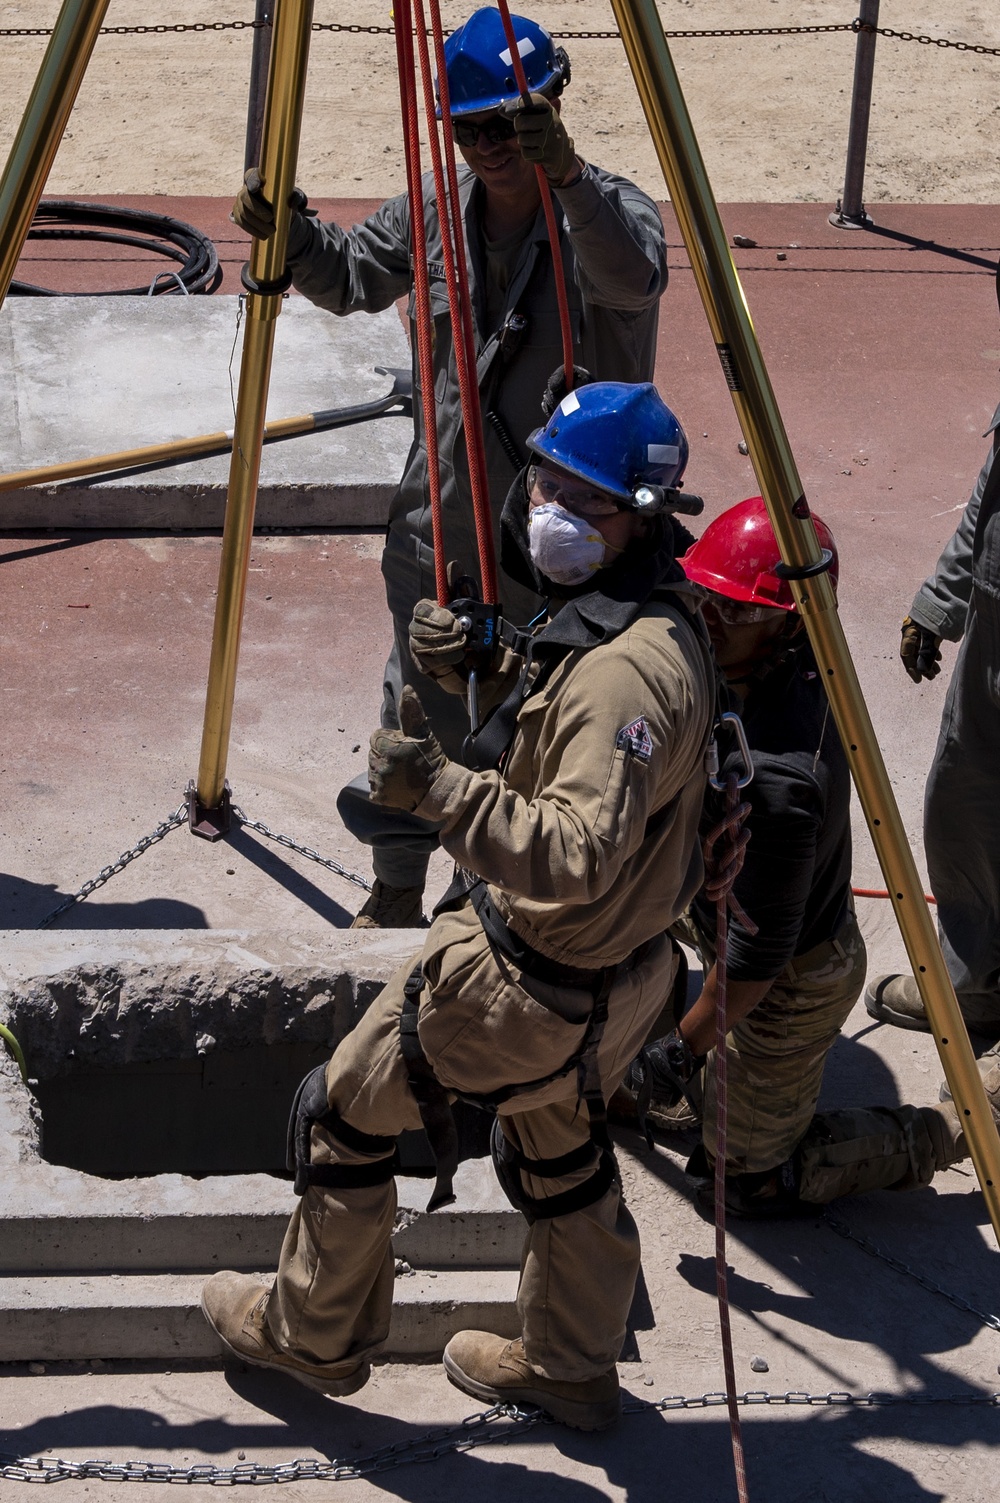 ANG firefighters and ITTF members conduct USAR training at PATRIOT 21